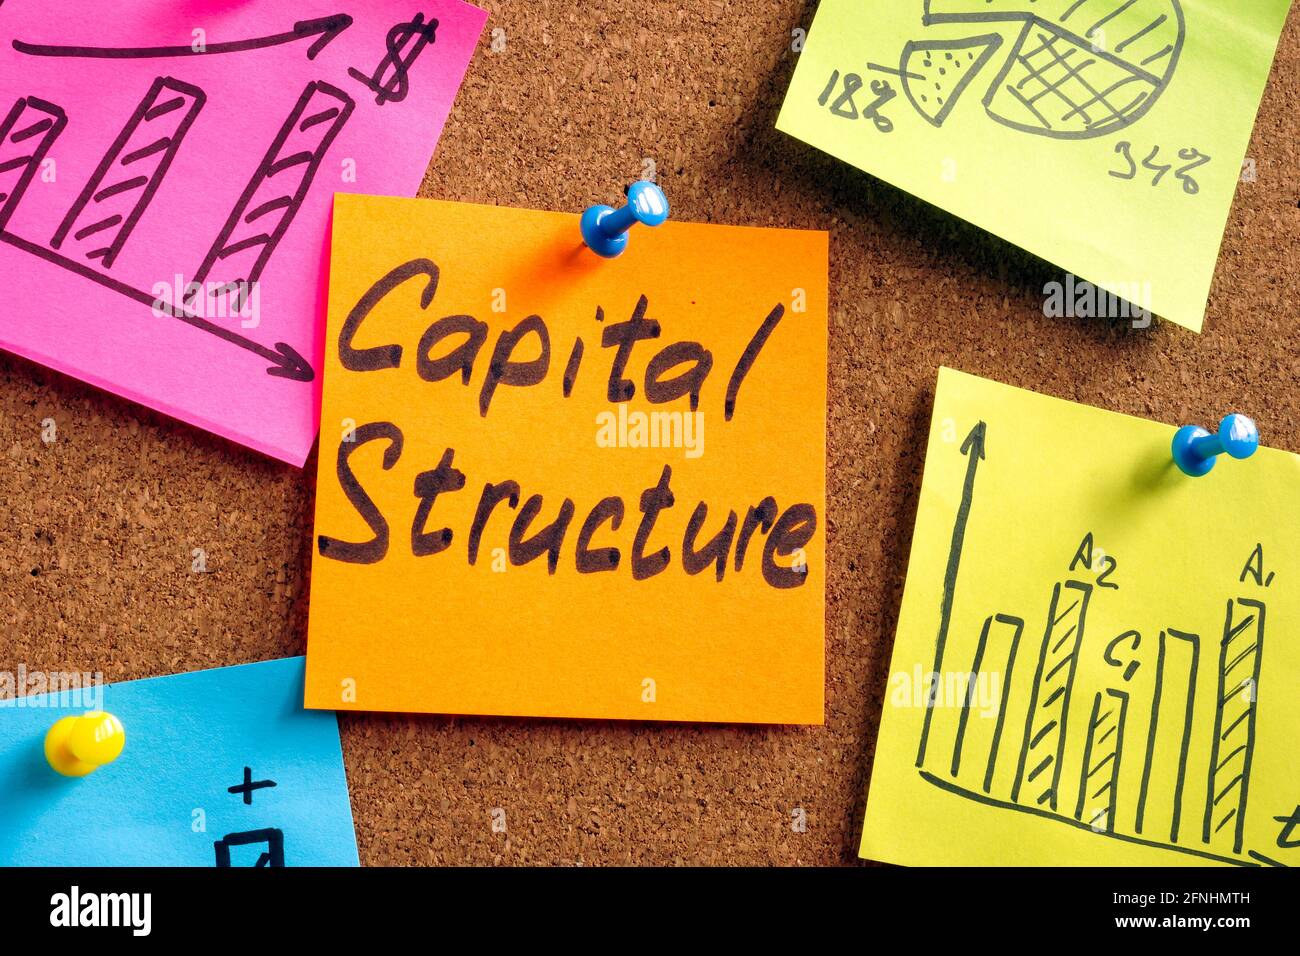 Capital structure memo pinned on the board in the office. Stock Photo